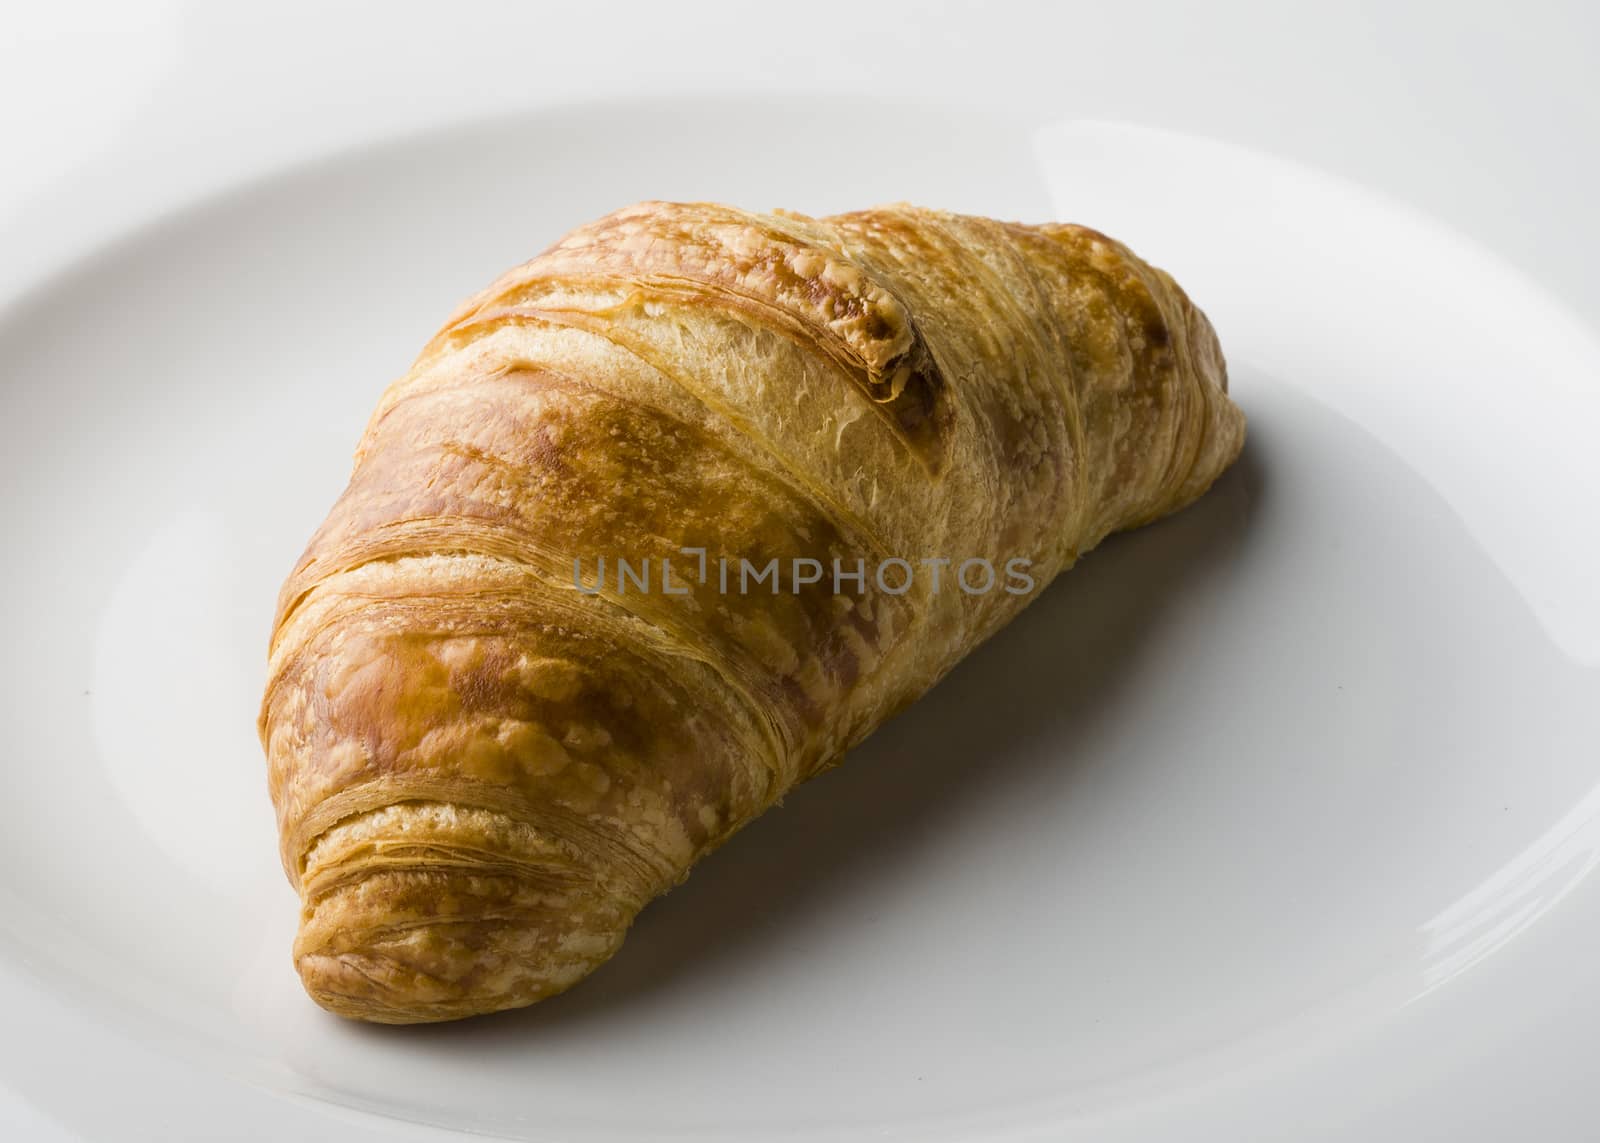 Croissant served on a white porcelain plate.